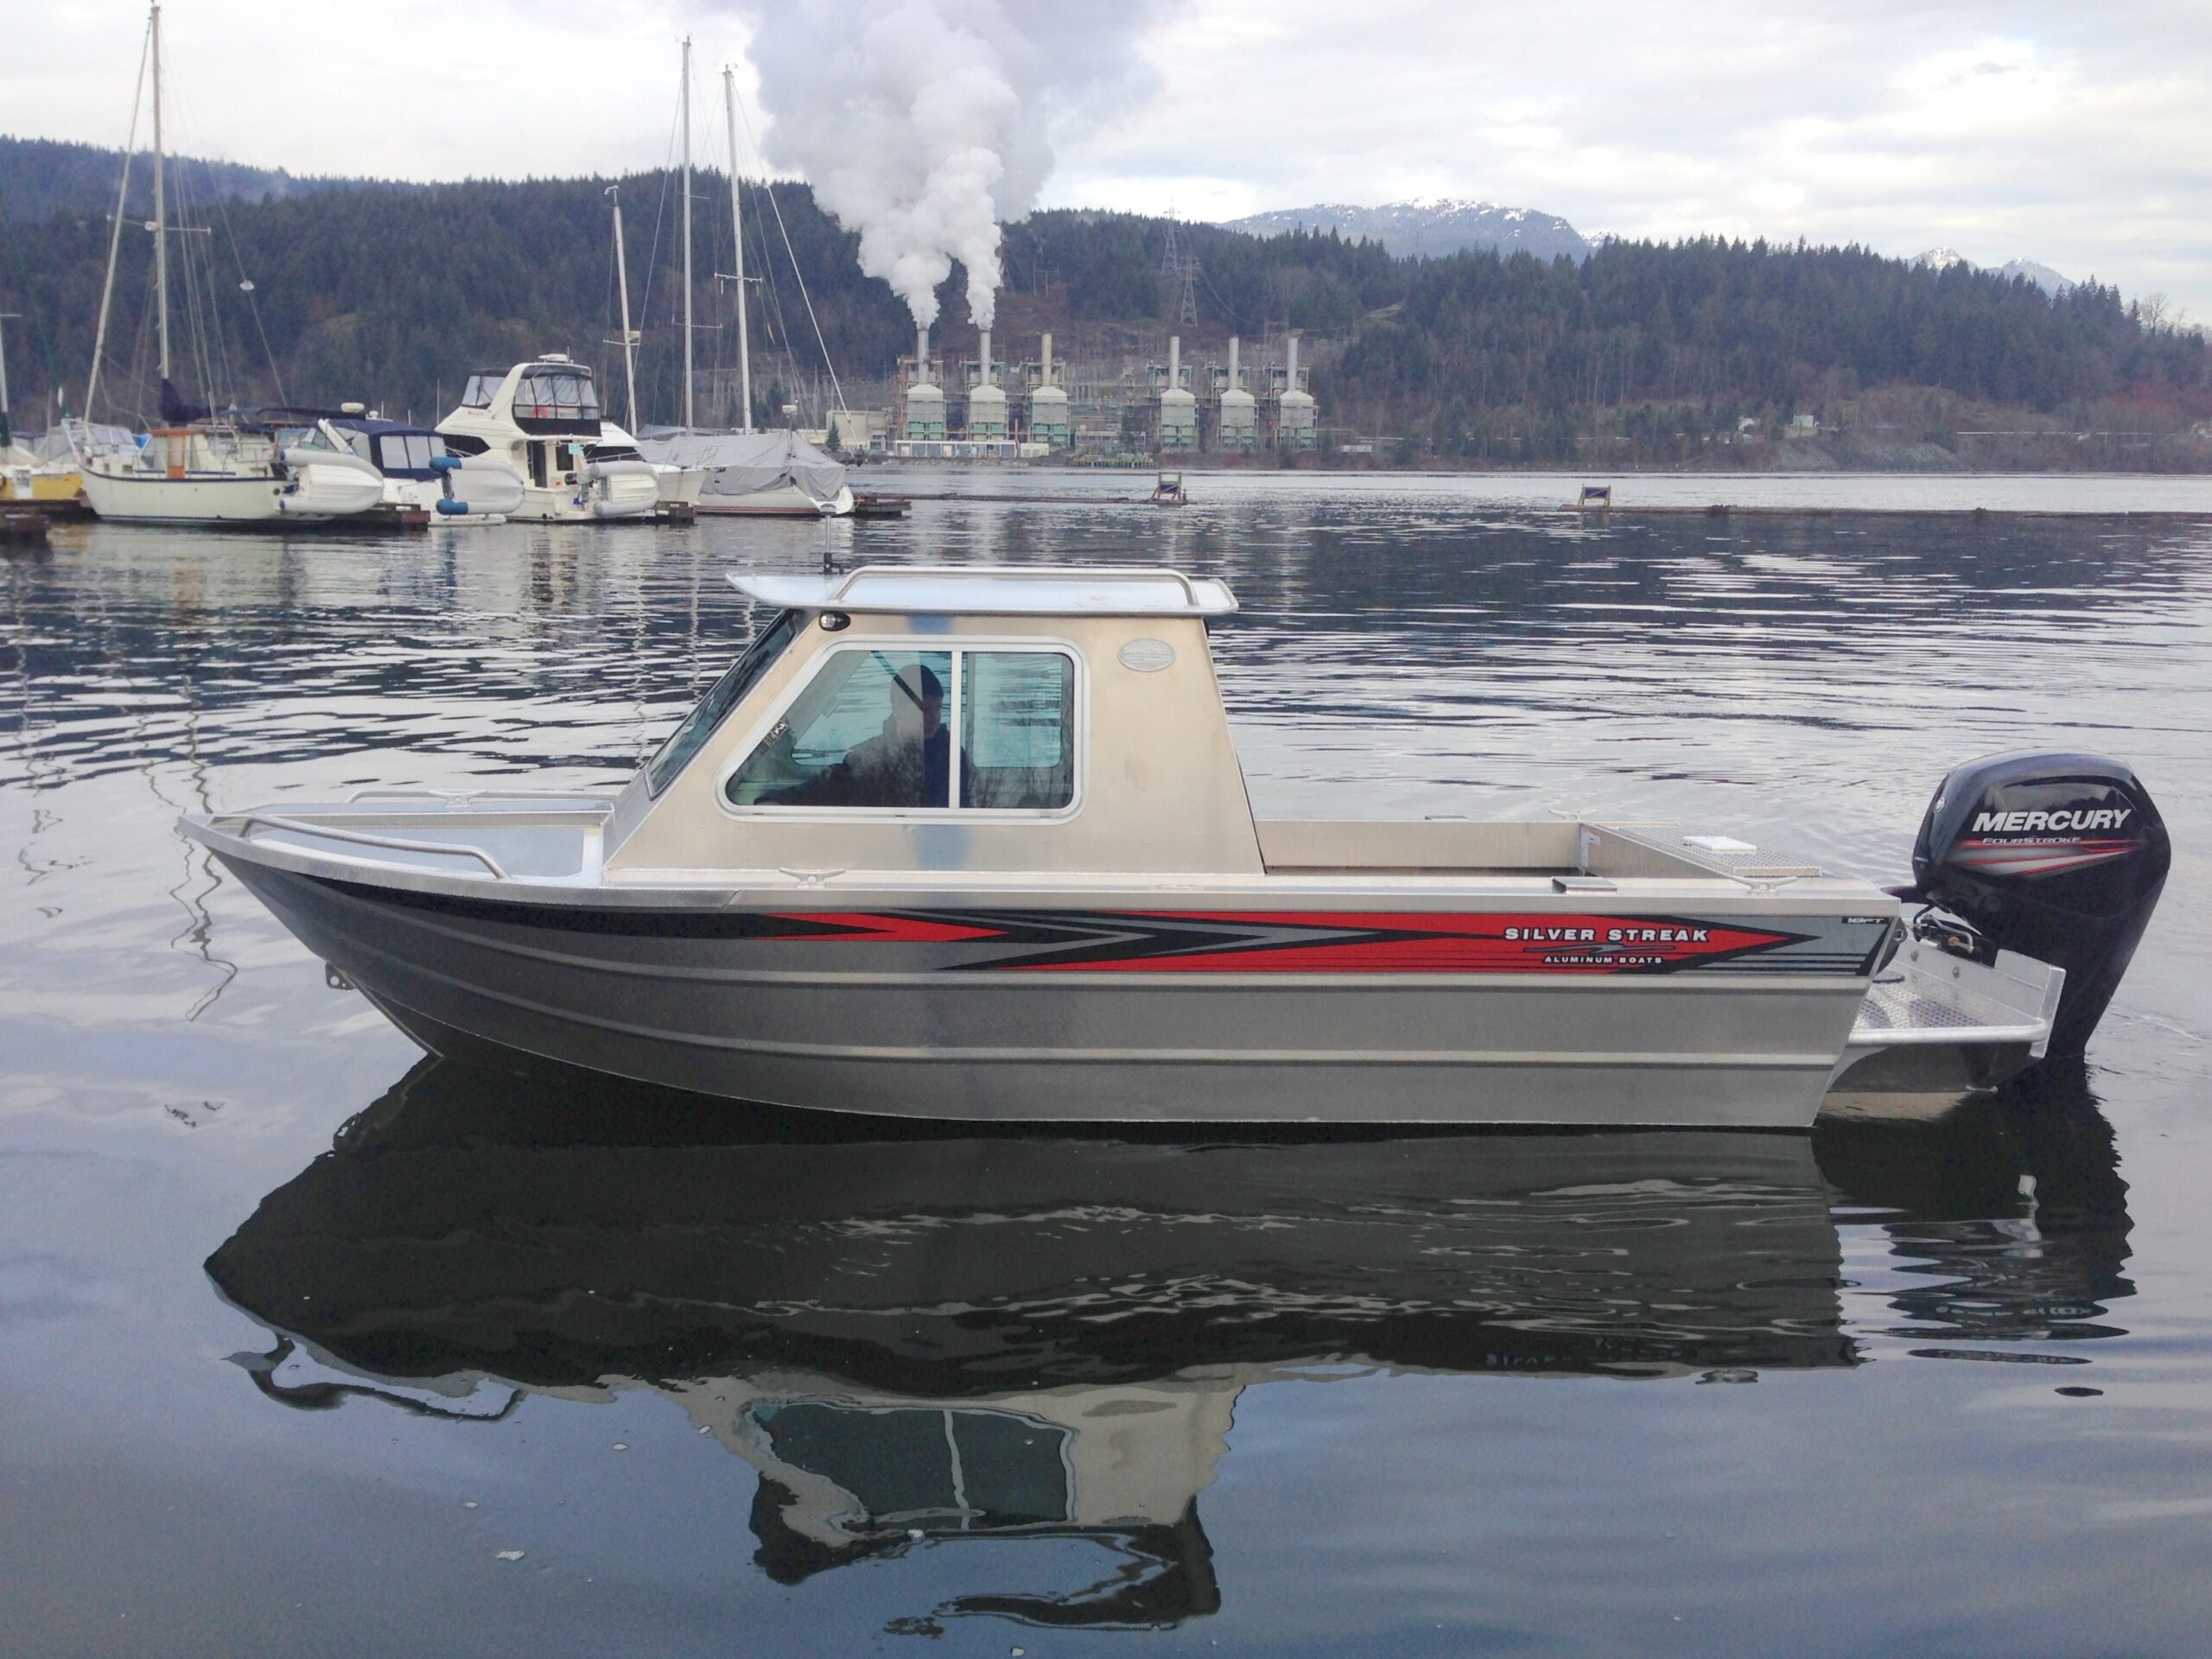 20' Renfew Hard Top Aluminum Boat - Hand Crafted by Silver Streak